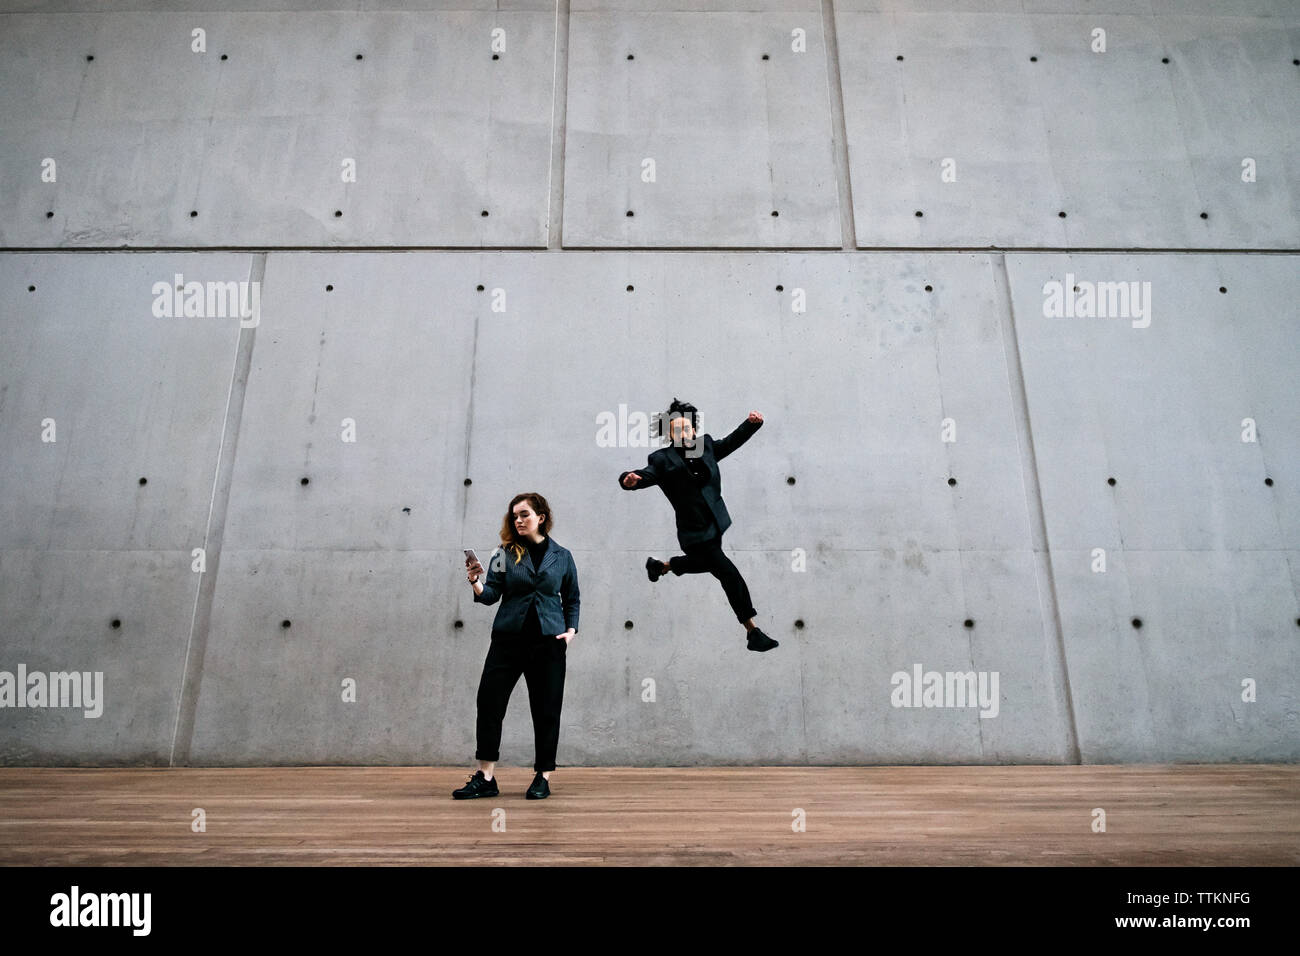 Man in mid-air while woman using phone against wall Stock Photo